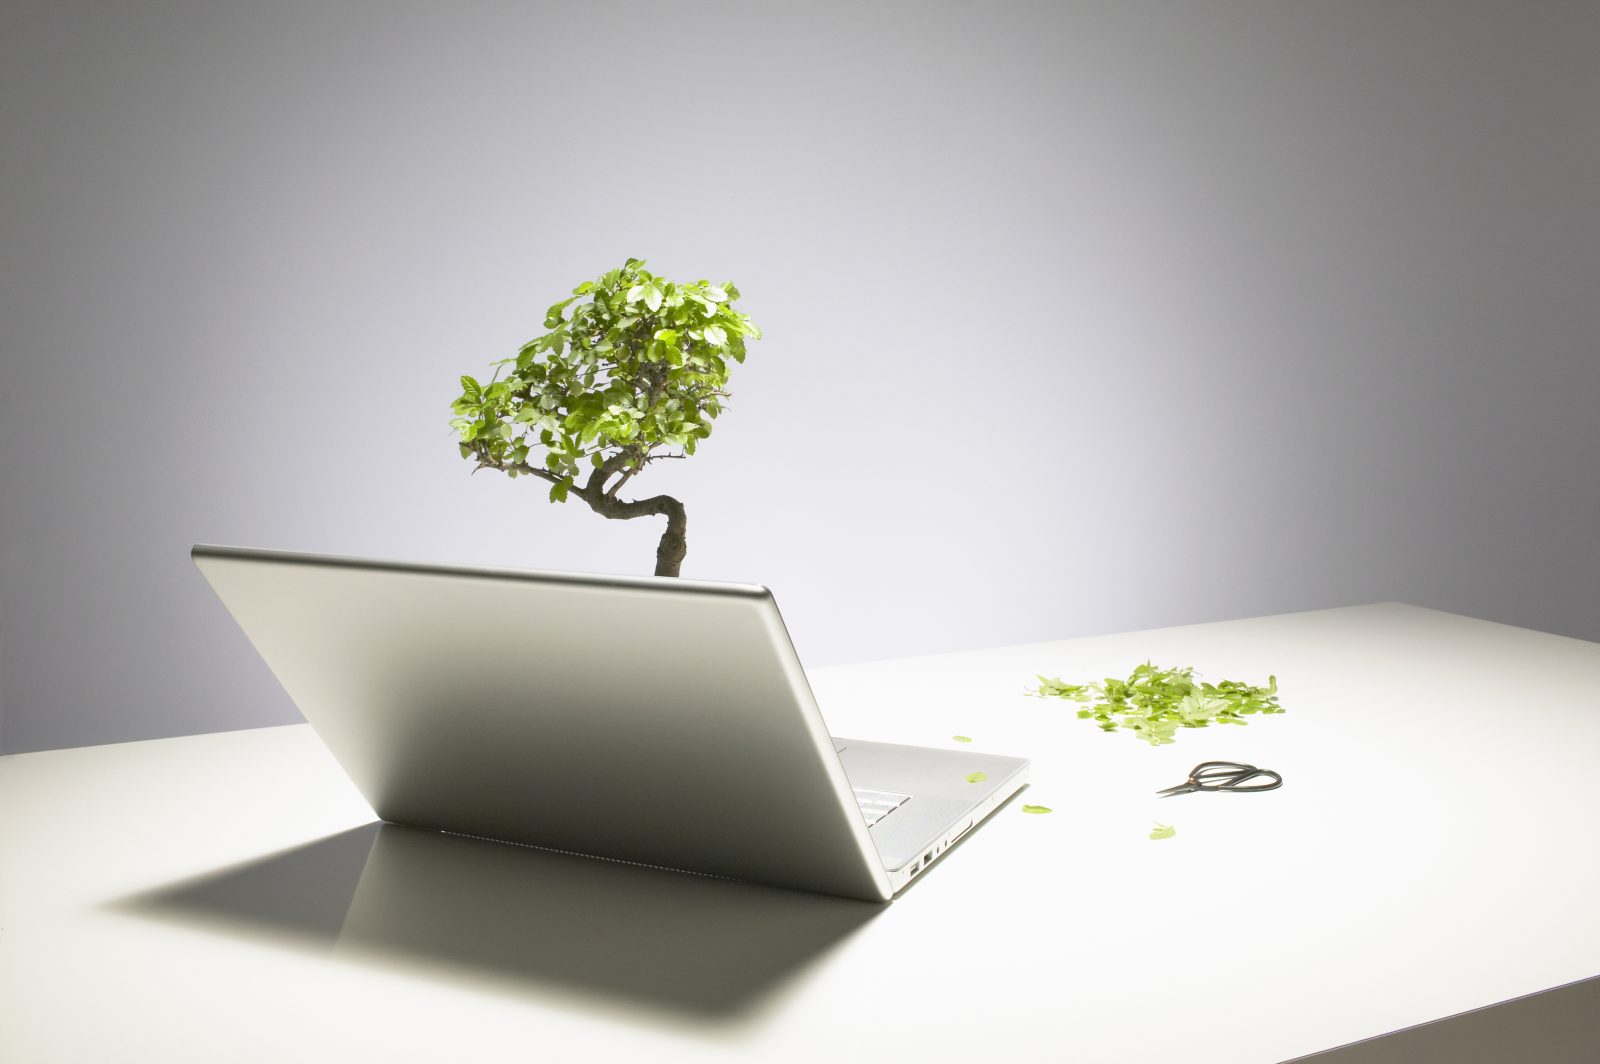 Clipped bonsai tree growing from laptop